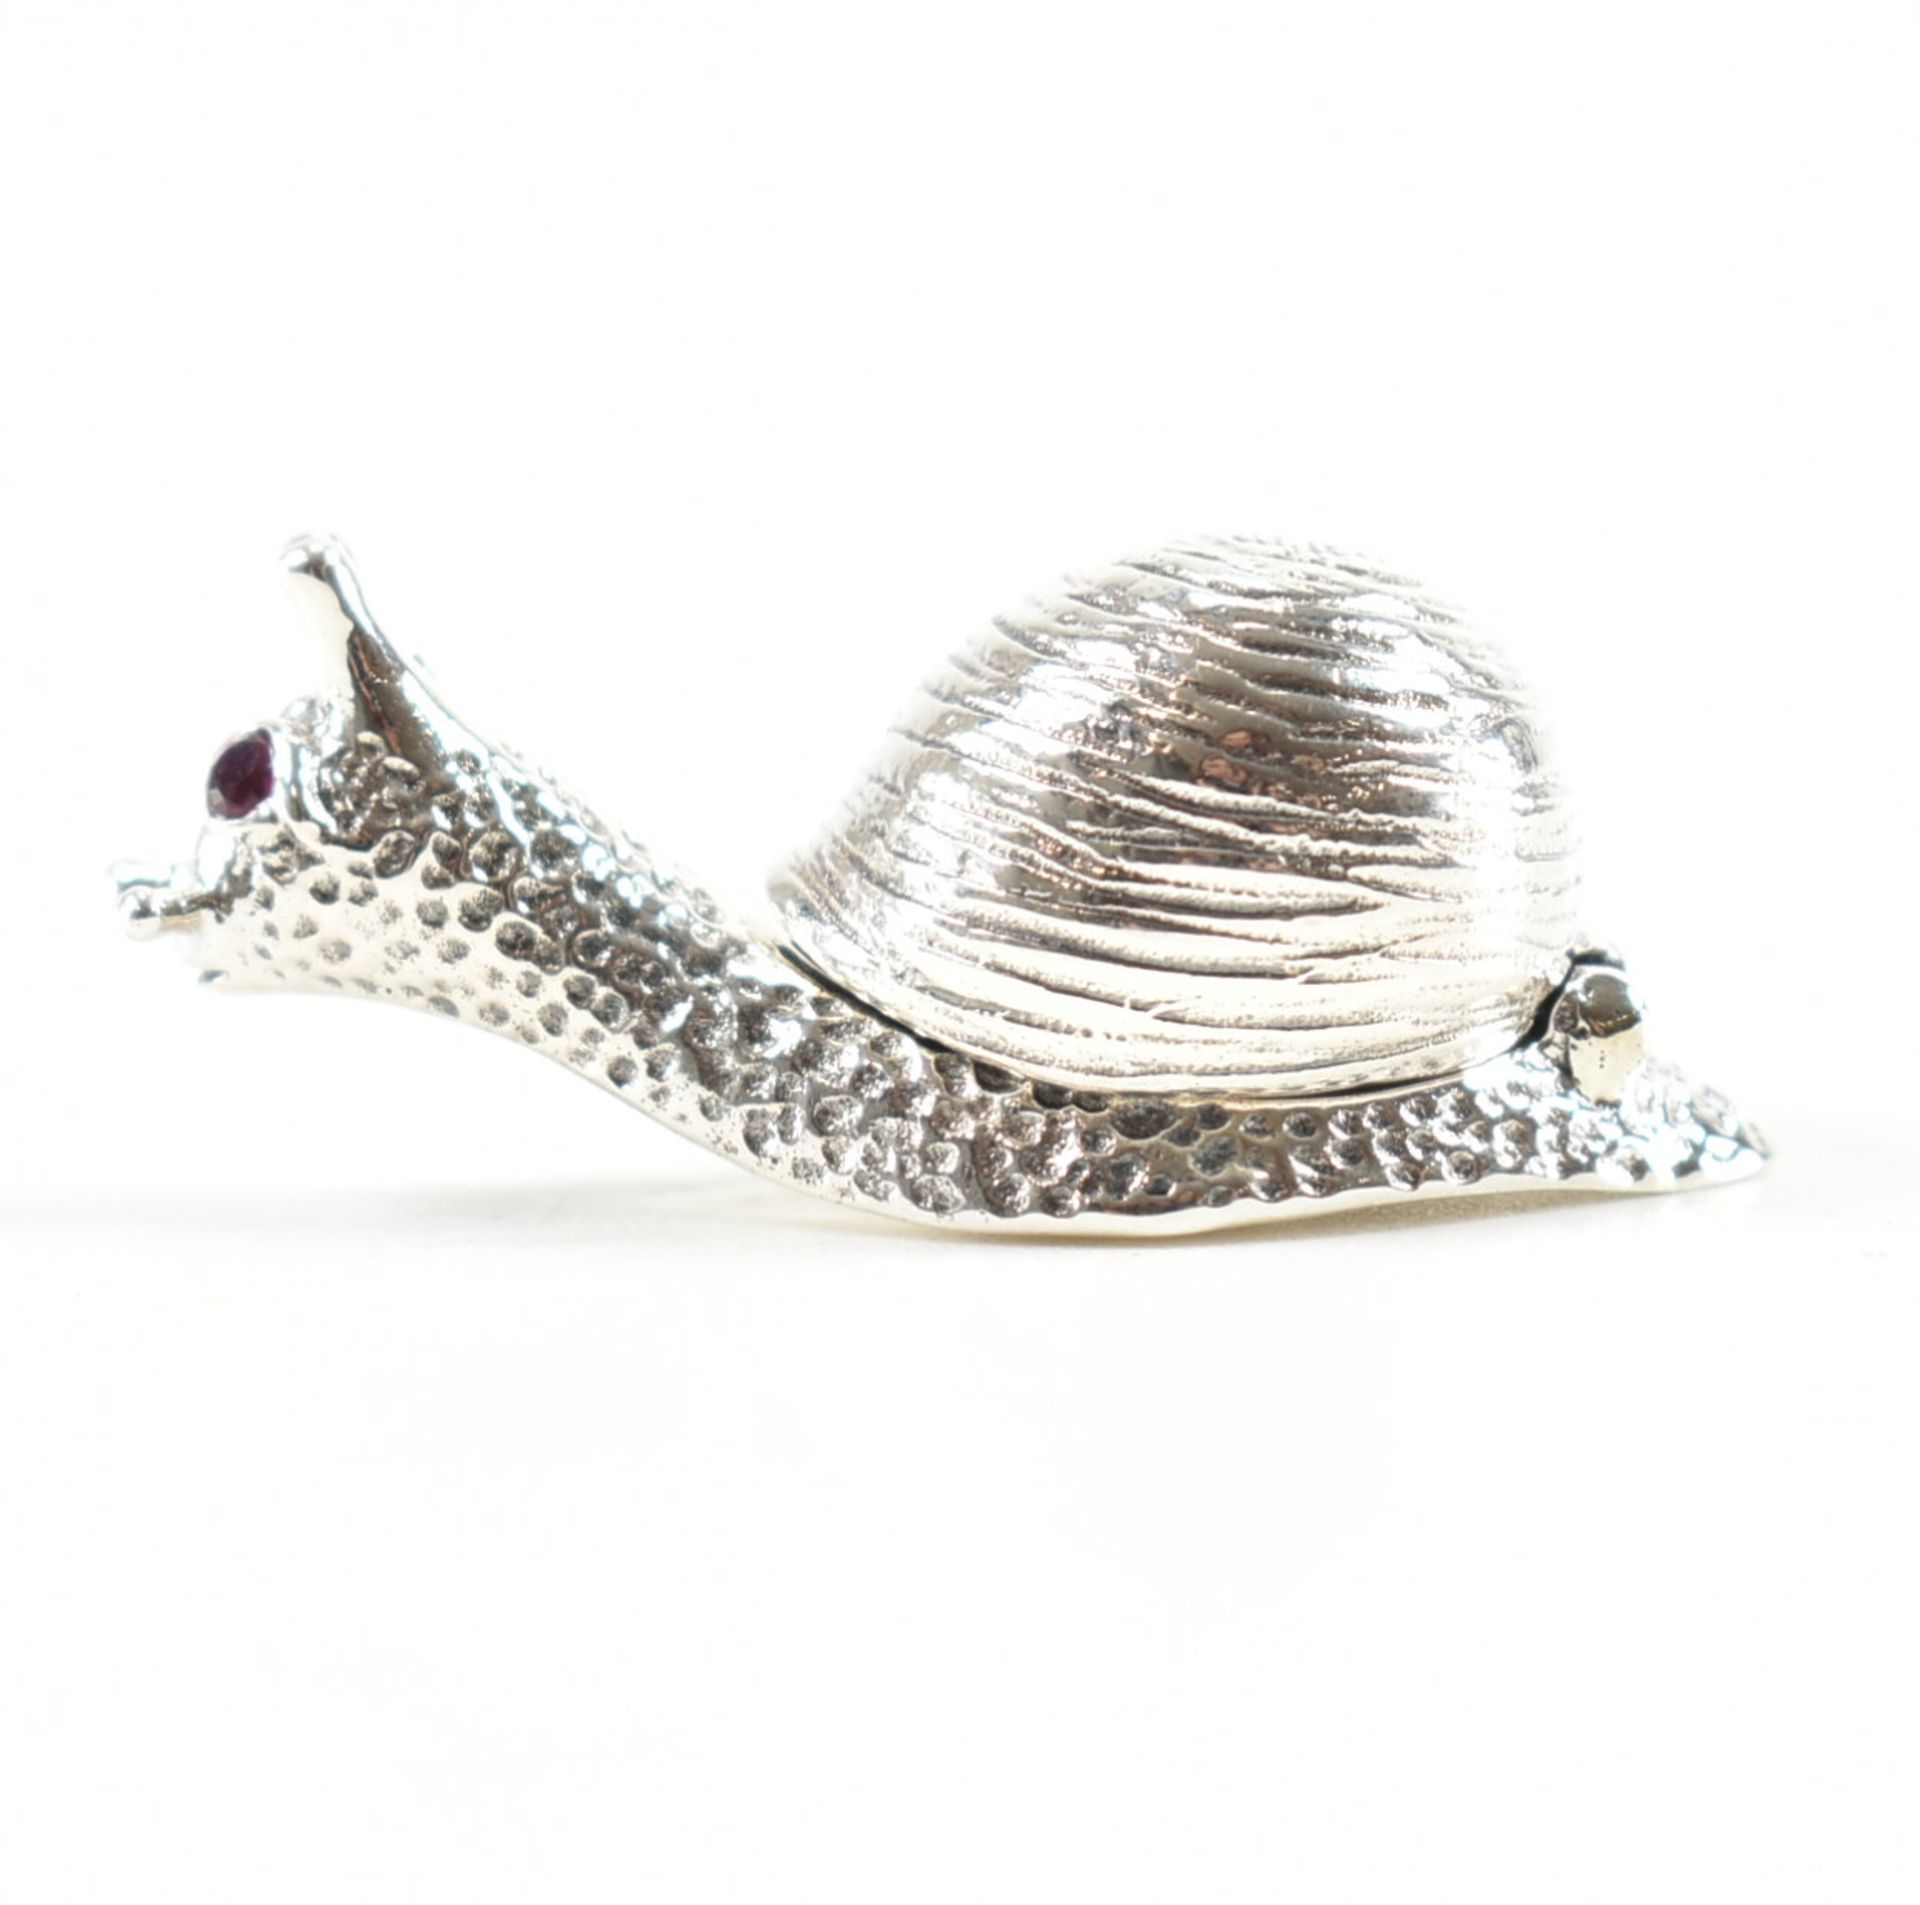 STERLING SILVER SNAIL BOX - Image 2 of 4